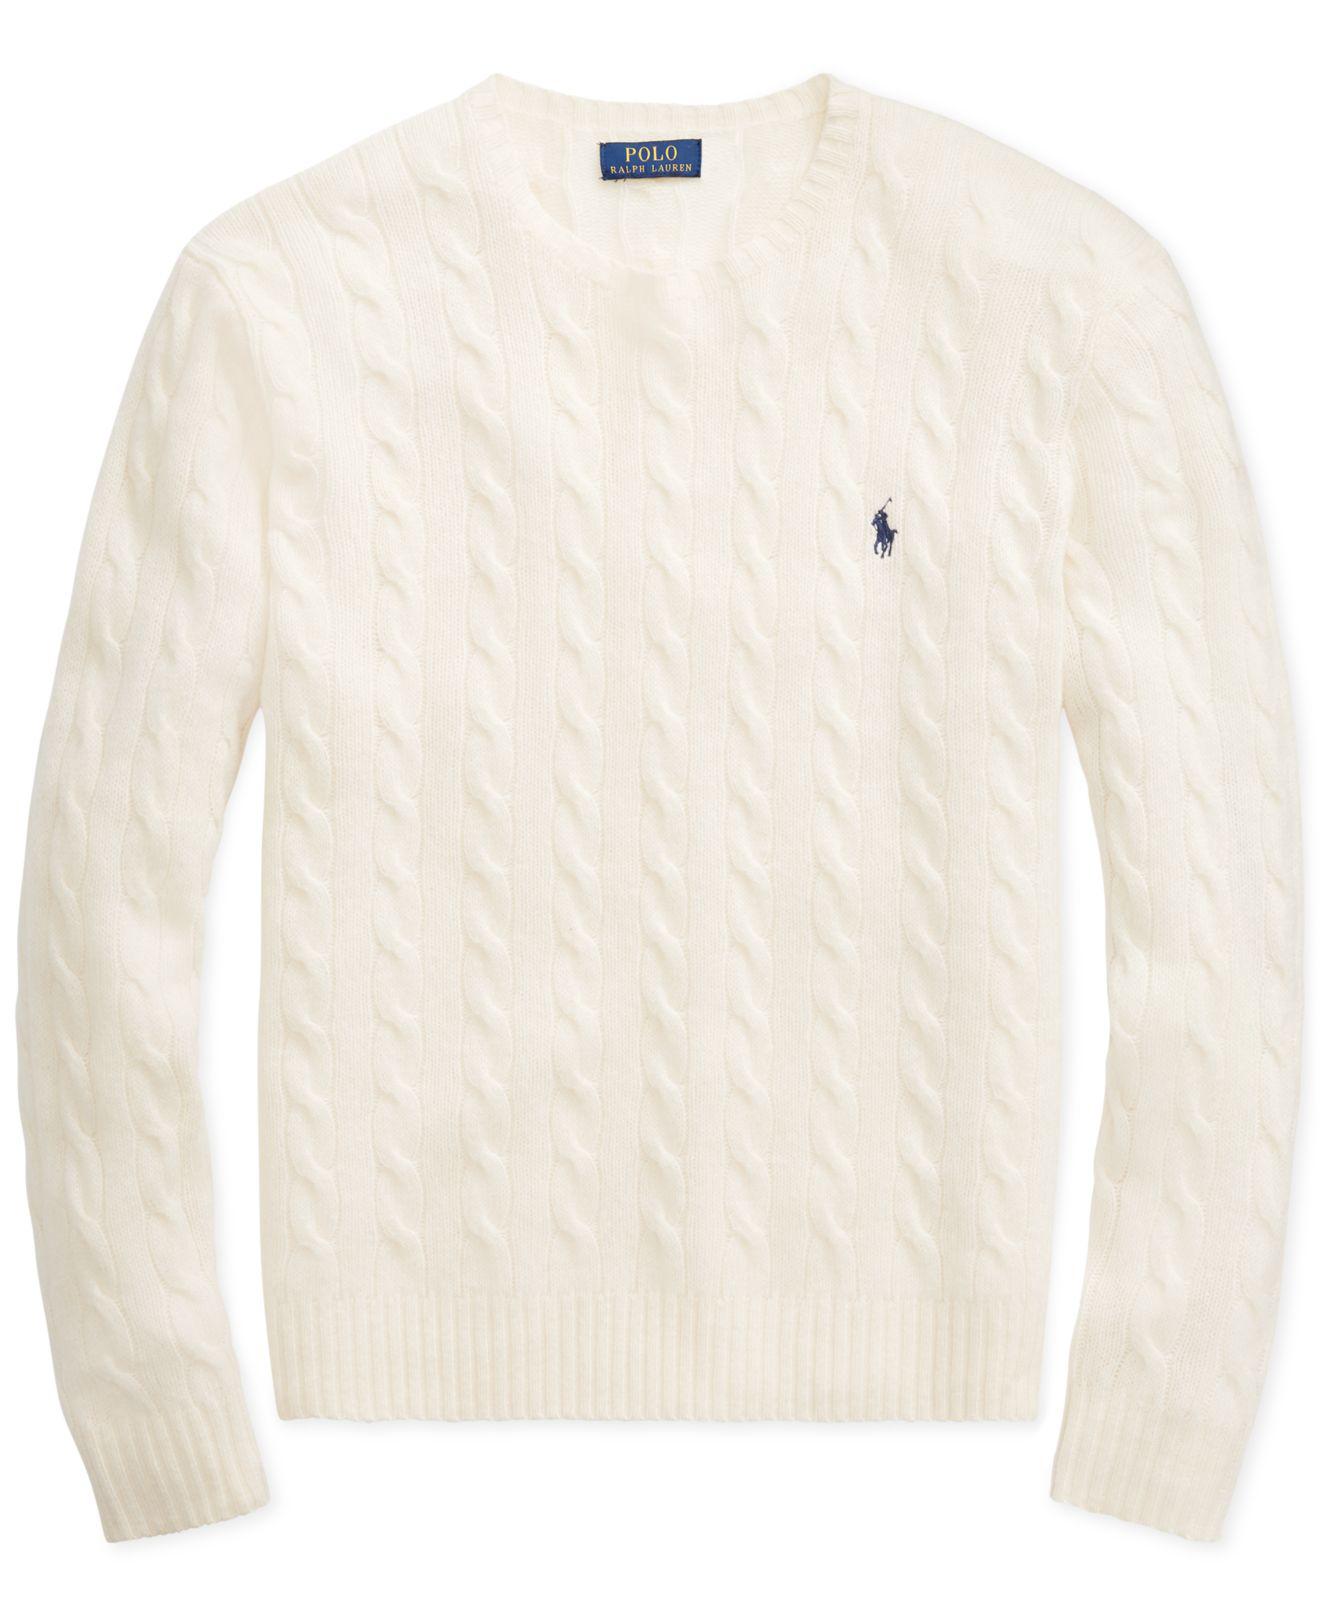 Polo Ralph Lauren Cable Wool-cashmere Sweater in Natural for Men - Lyst